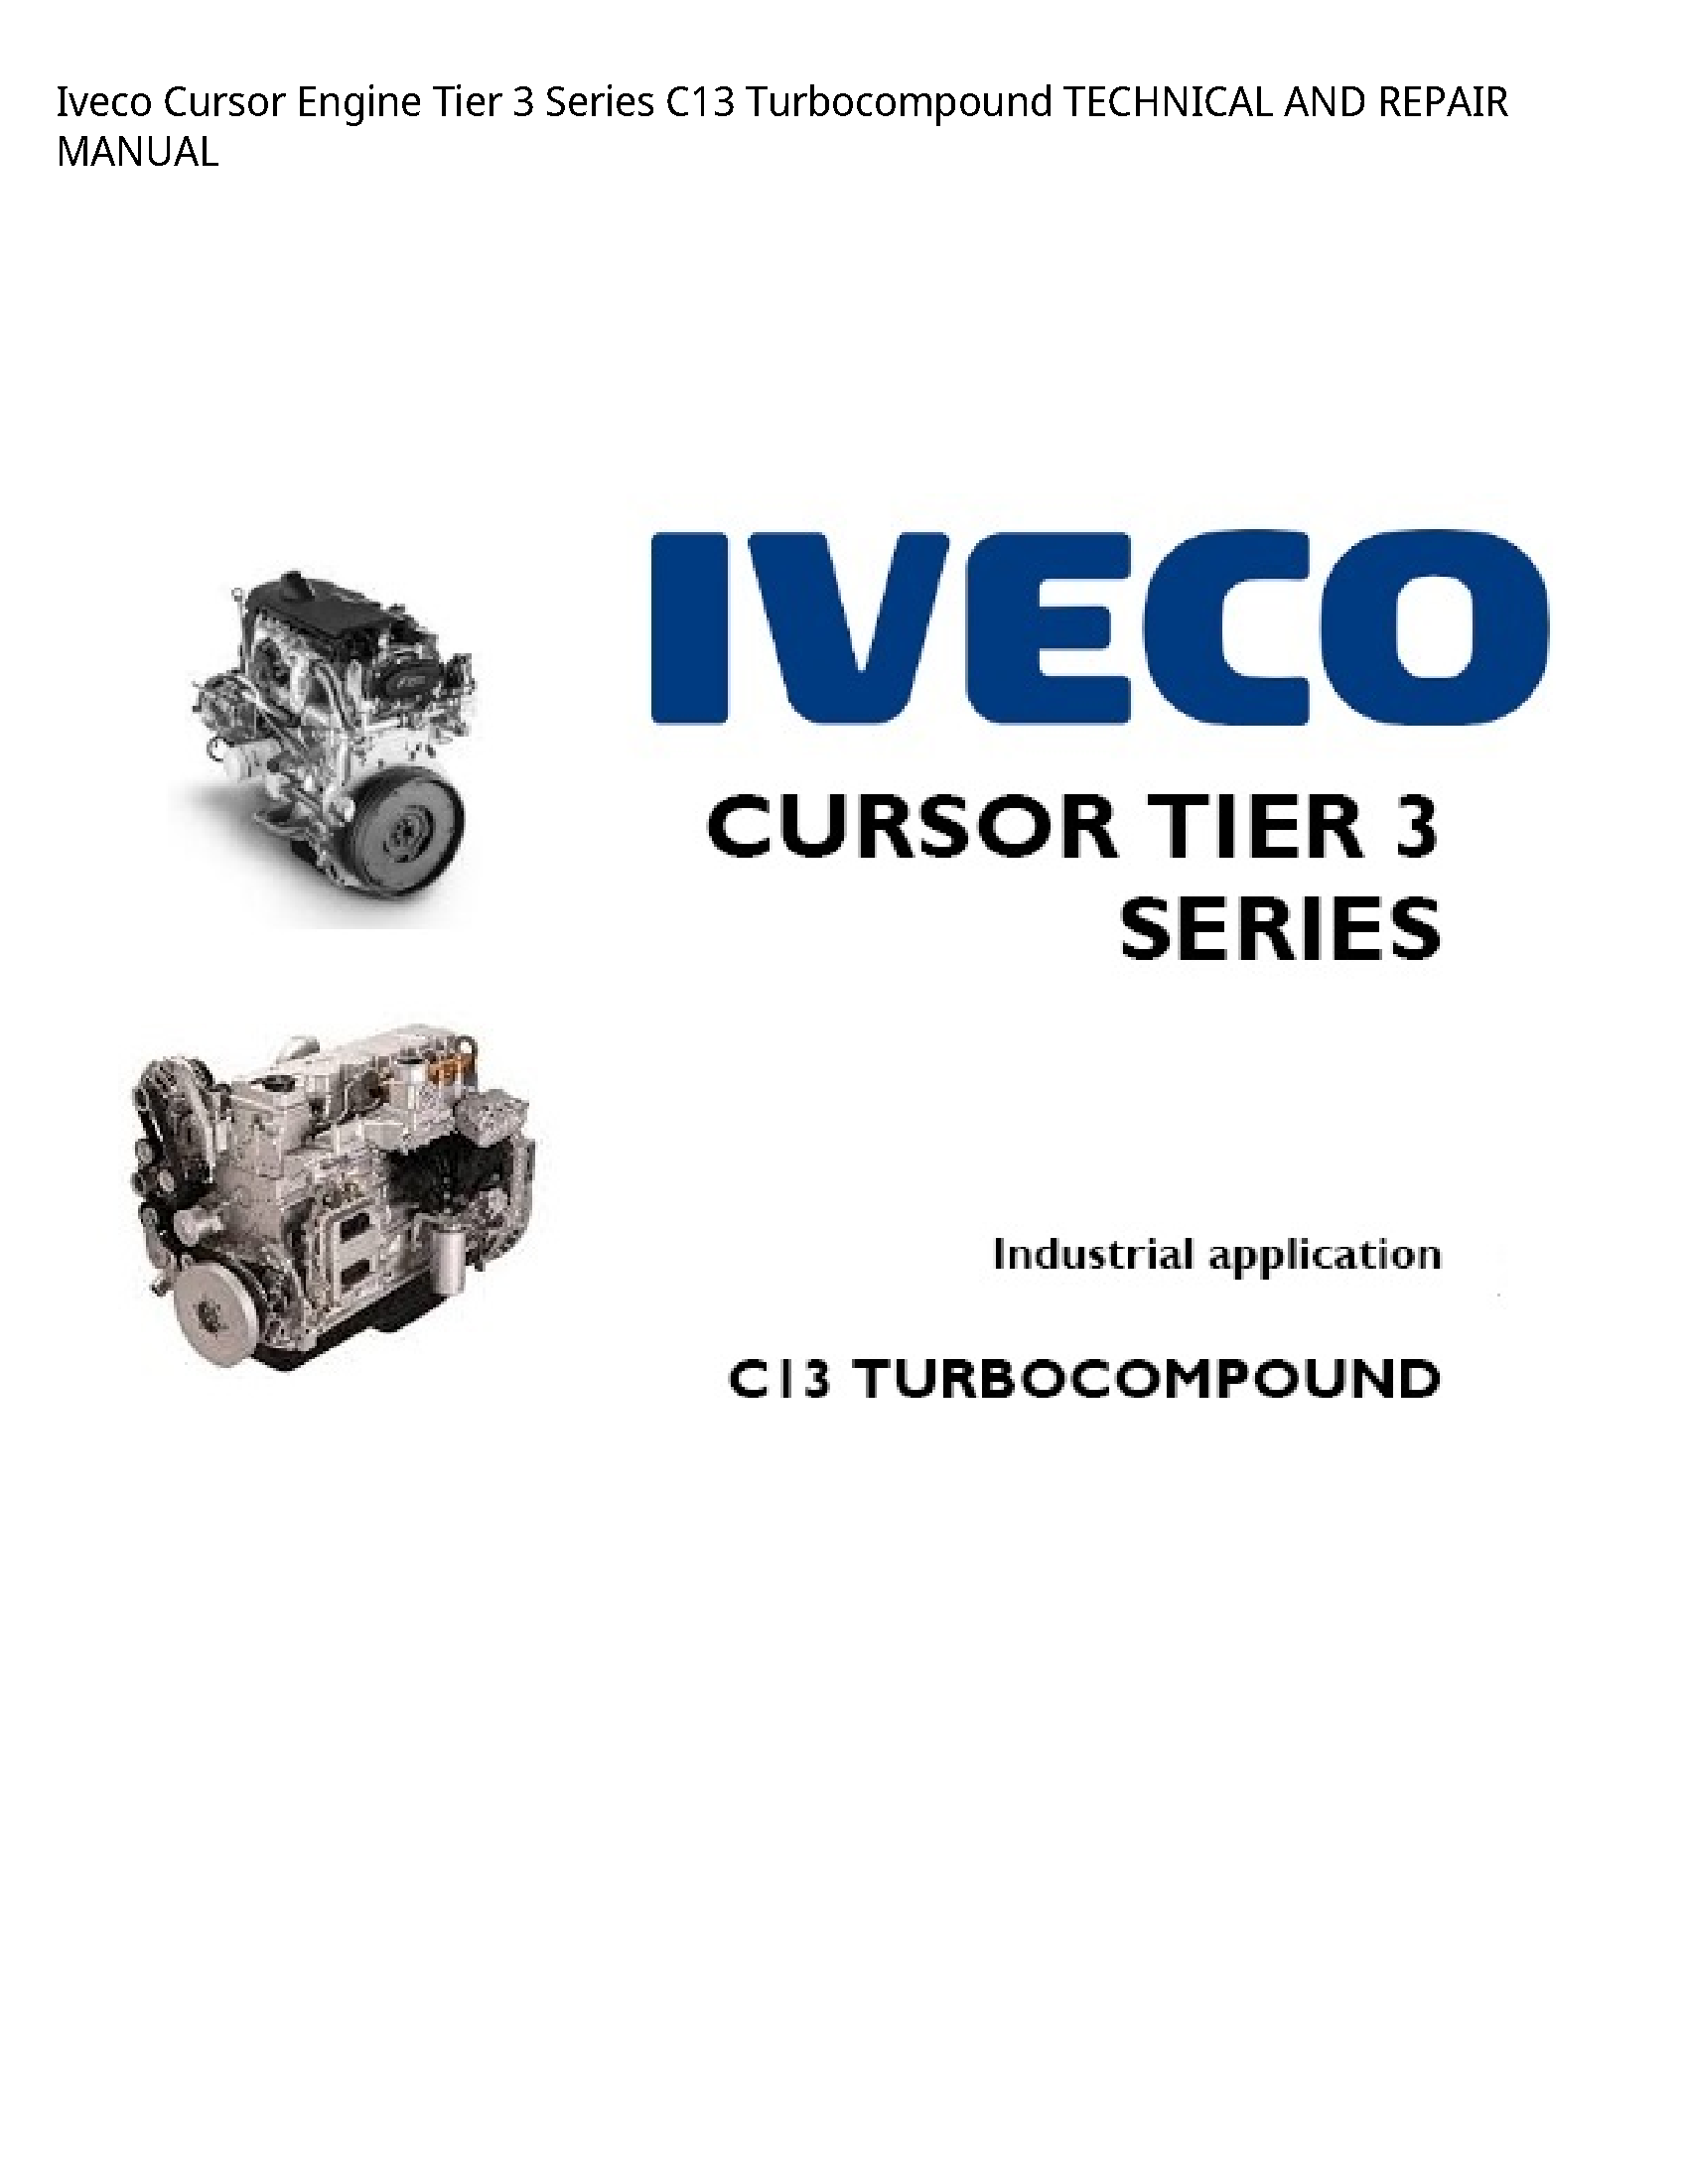 Iveco 3 Cursor Engine Tier Series Turbocompound TECHNICAL AND REPAIR manual